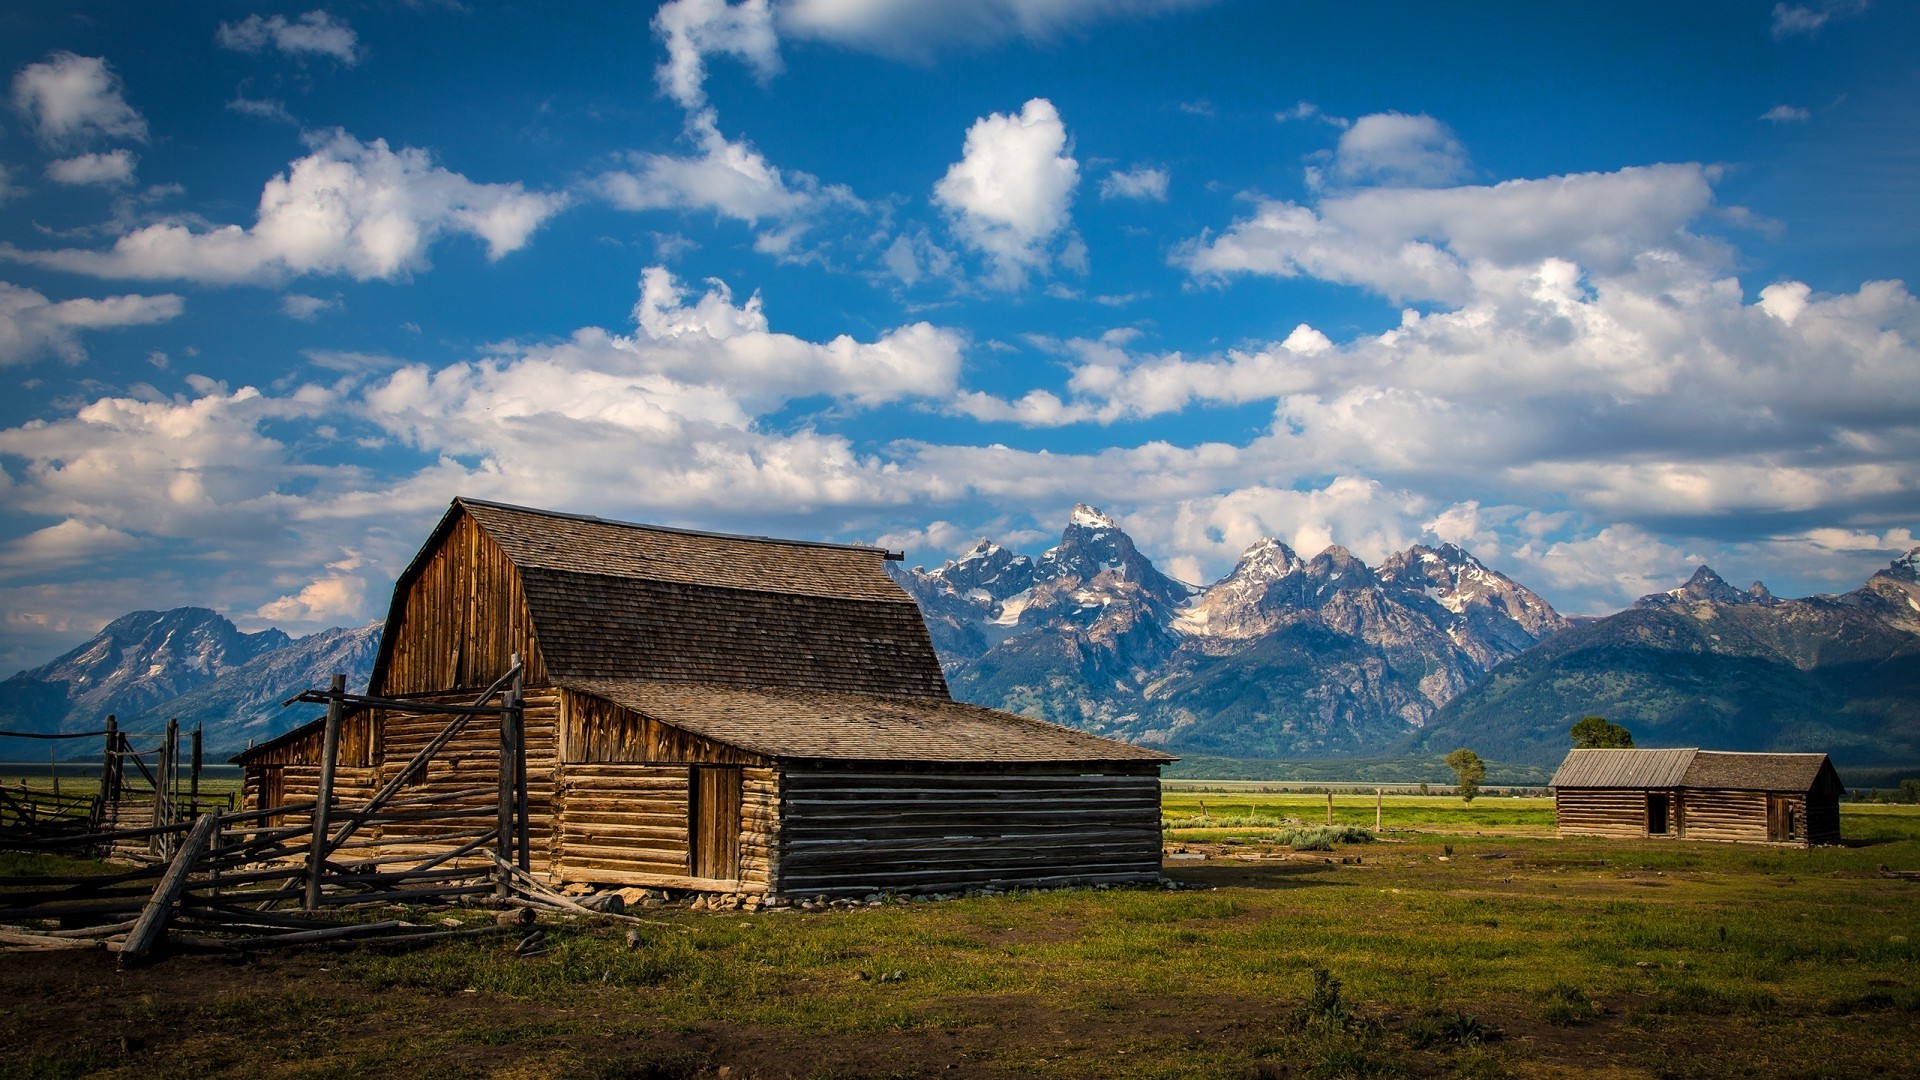 nature, Landscape, Building, Clouds, Grand Teton National Park, Wood, House, Wyoming, USA, Mountain, Snowy Peak, Field, Grass, Trees, Fence Wallpaper